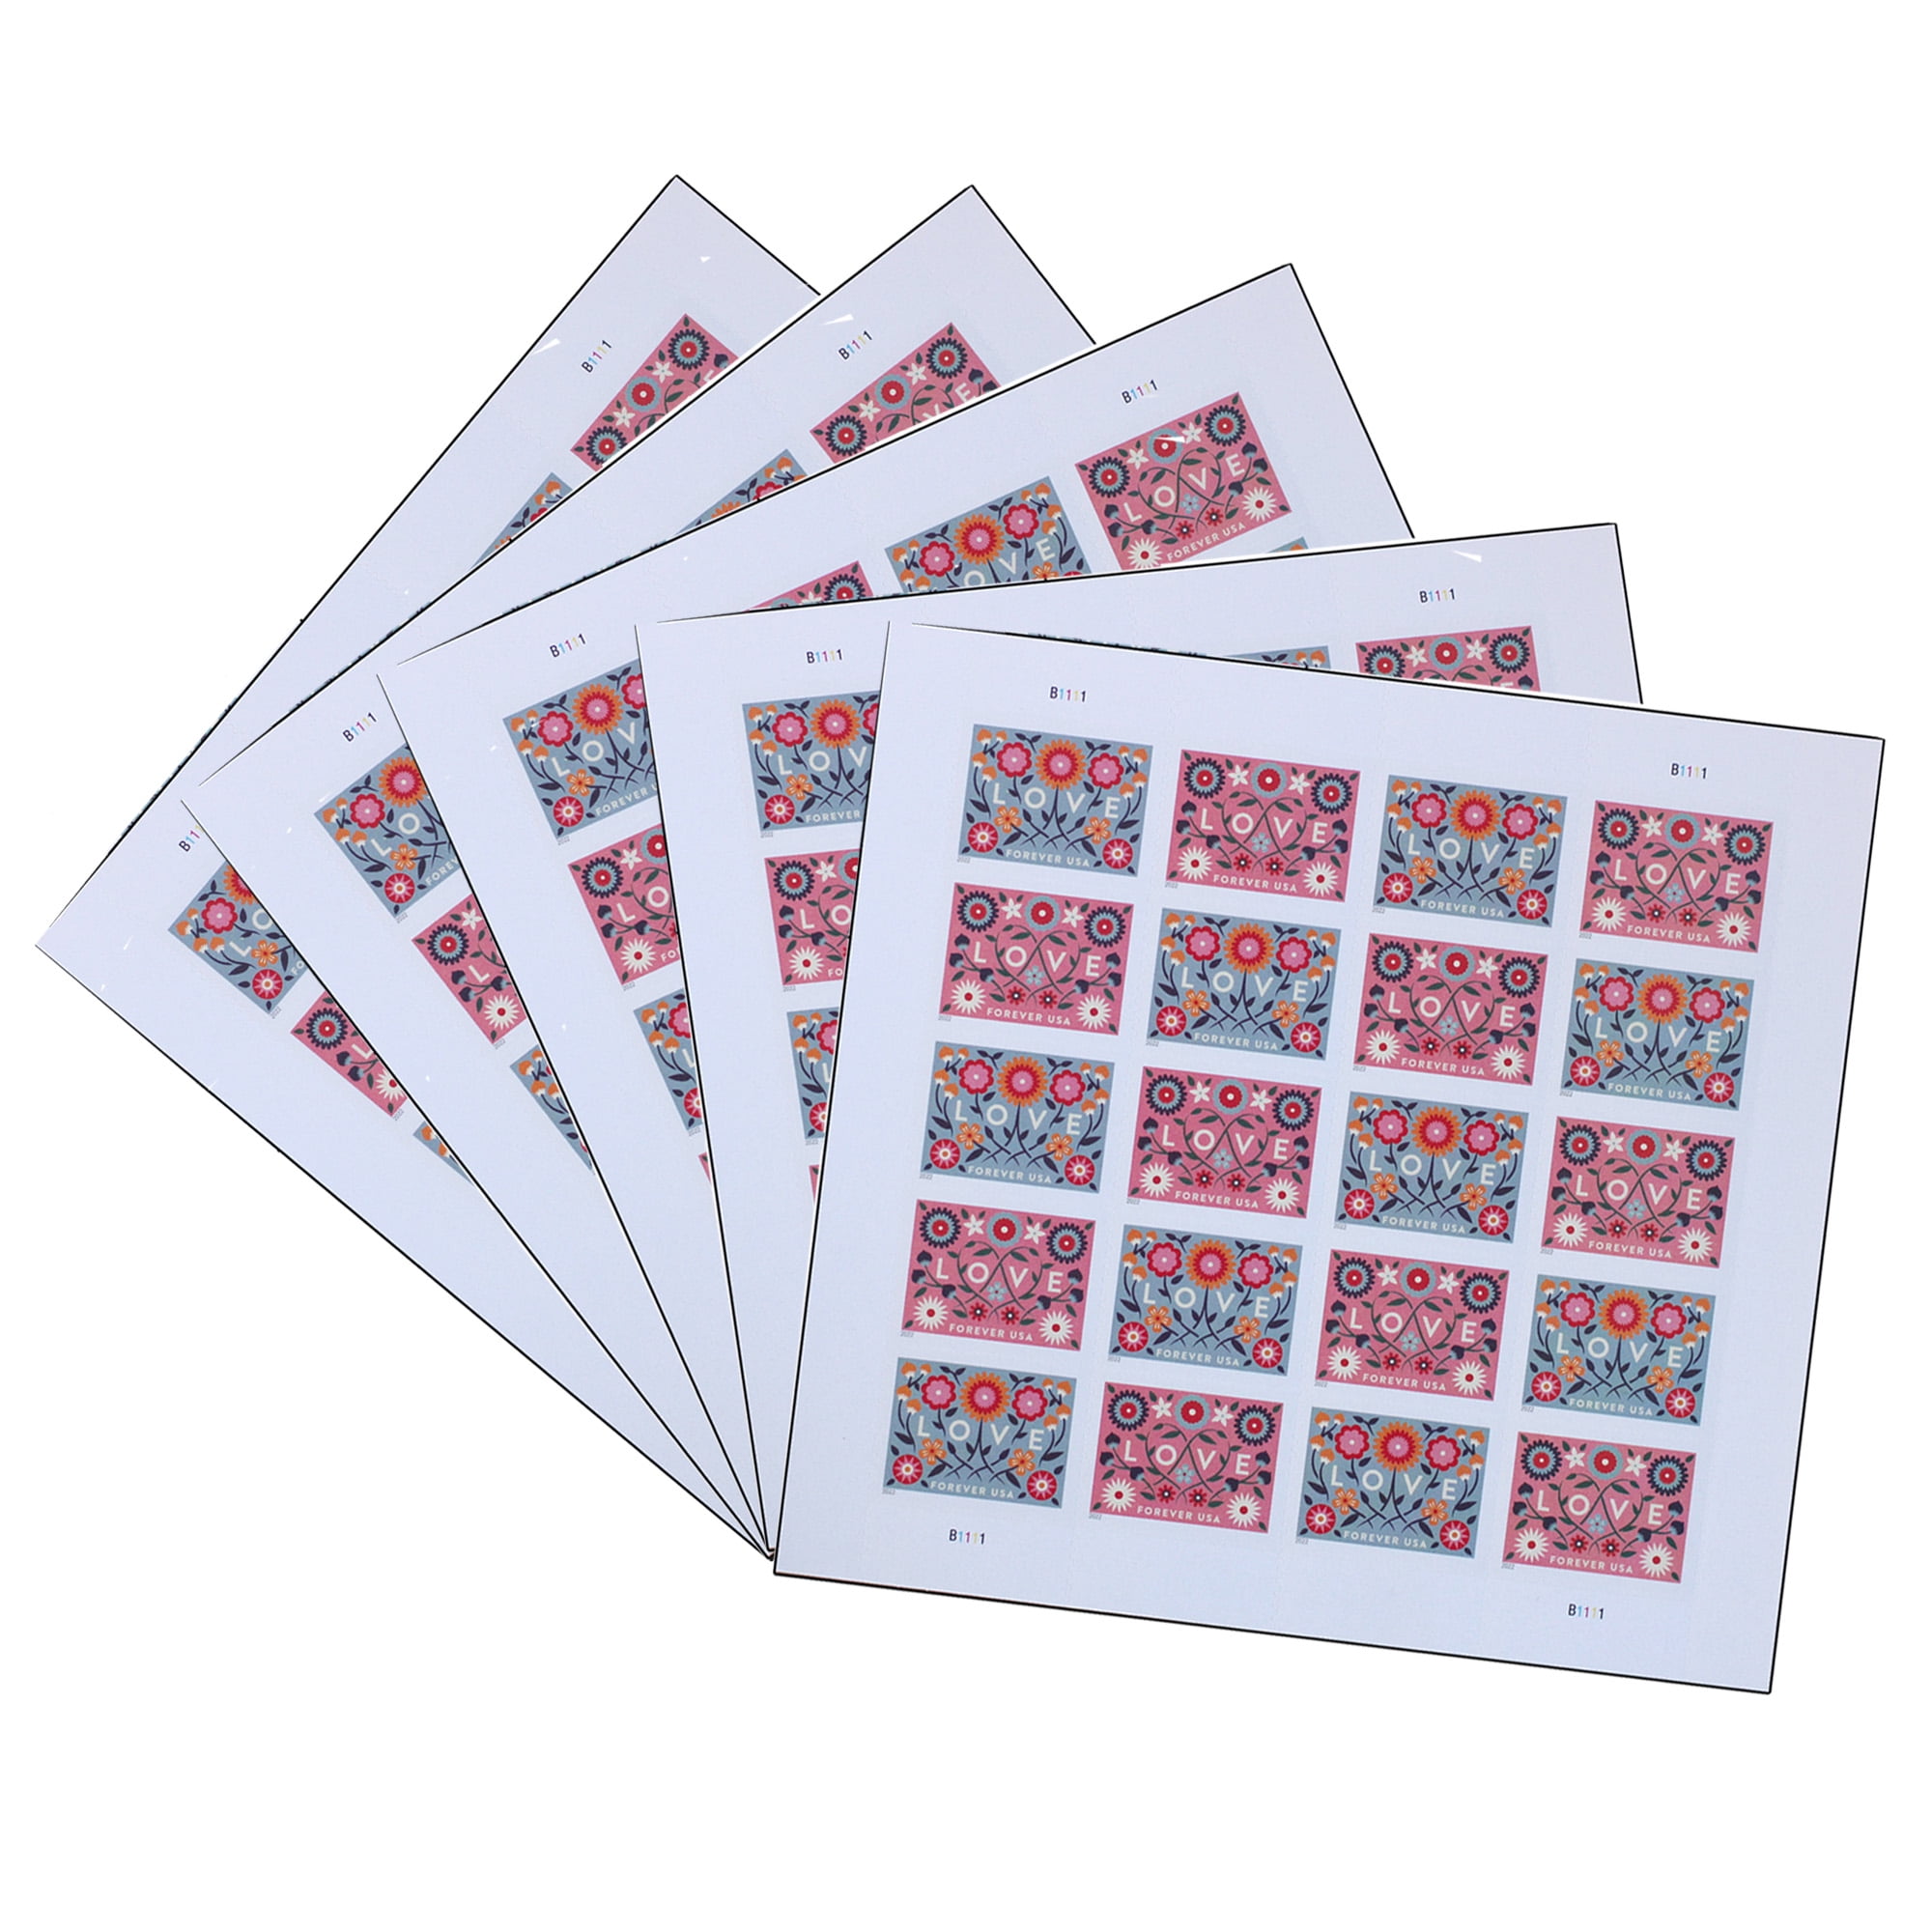 5660c 5660-61a Love 2022 Imperf Block of 4 Forever Stamps 2